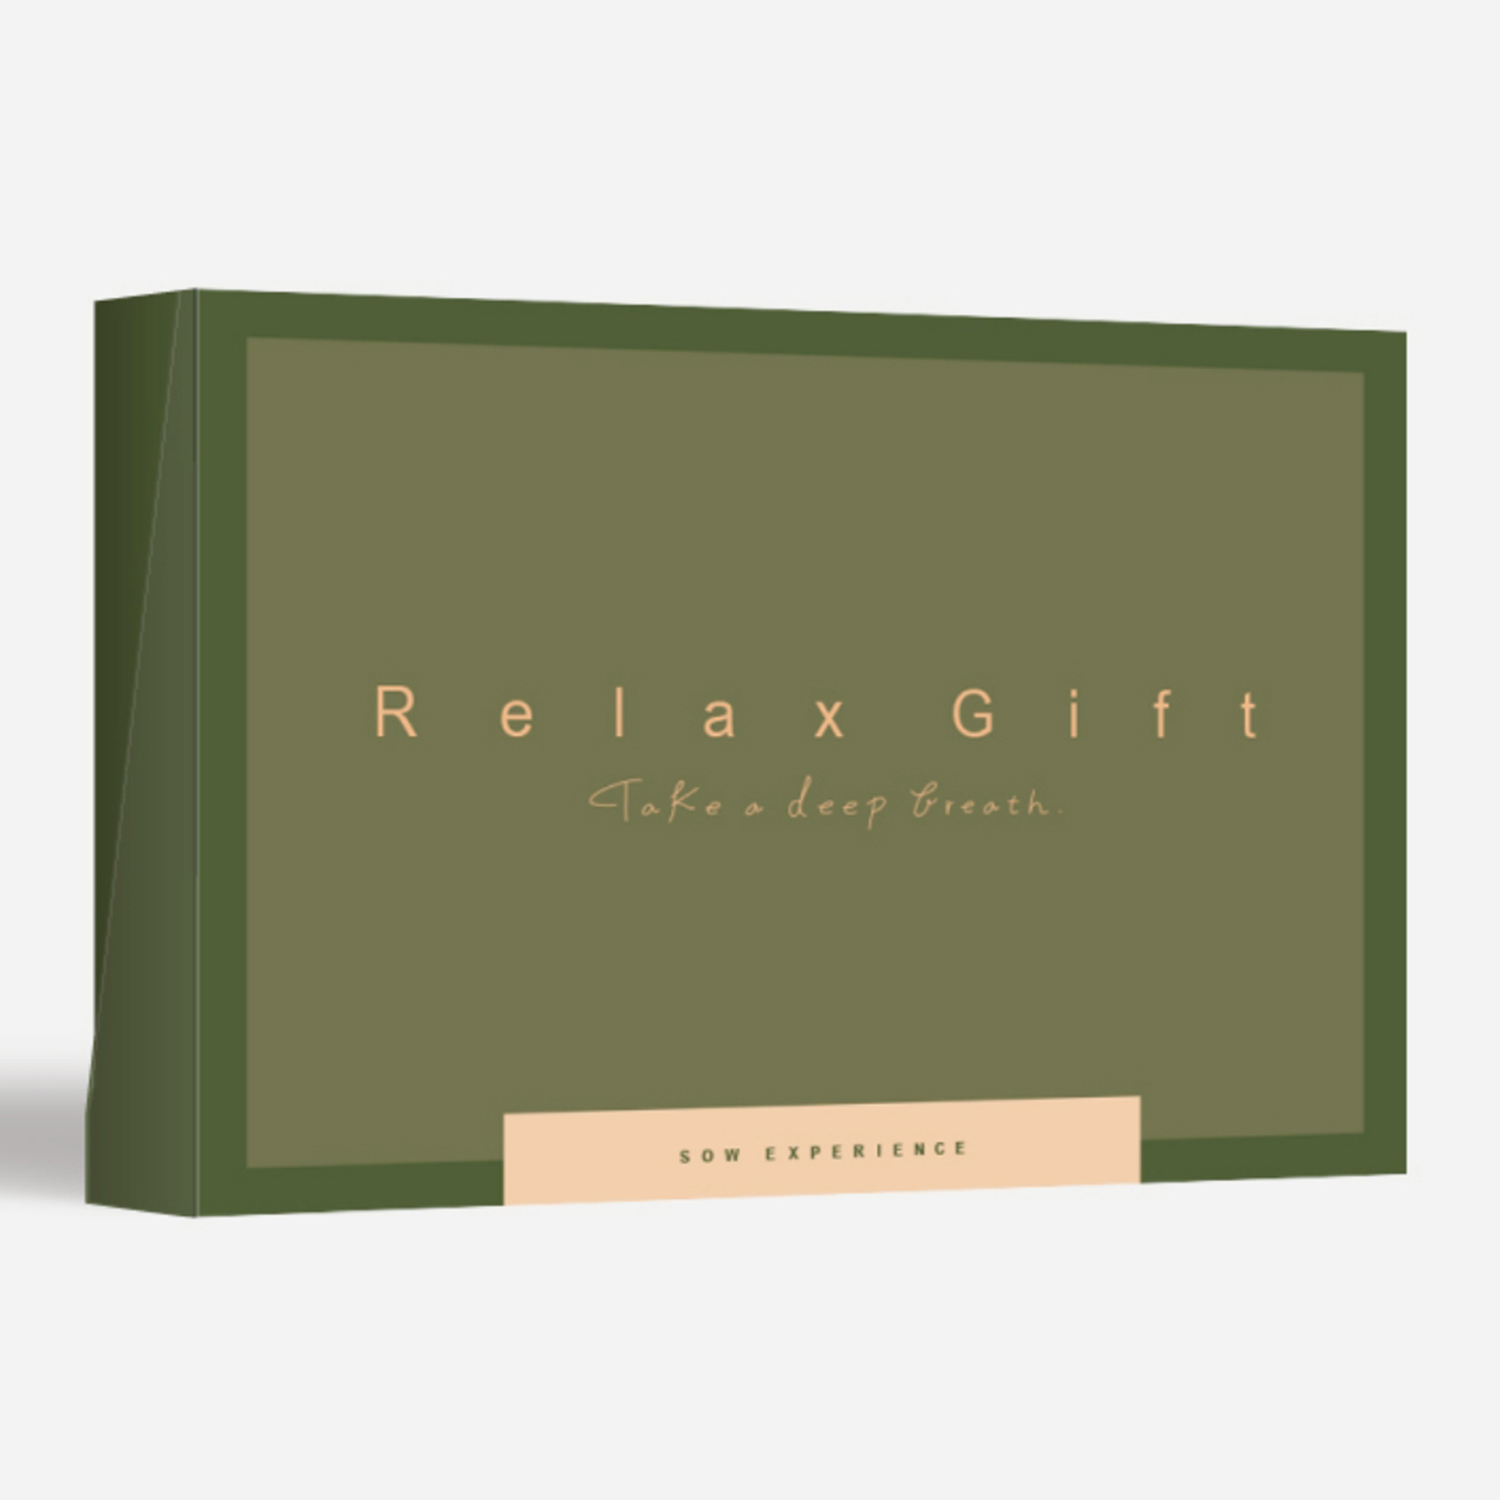 ≪SOW EXPERIENCE（ソウ・エクスペリエンス）≫Relax Gift（GREEN）［カタログギフト］母の日ラッピング（送料込）